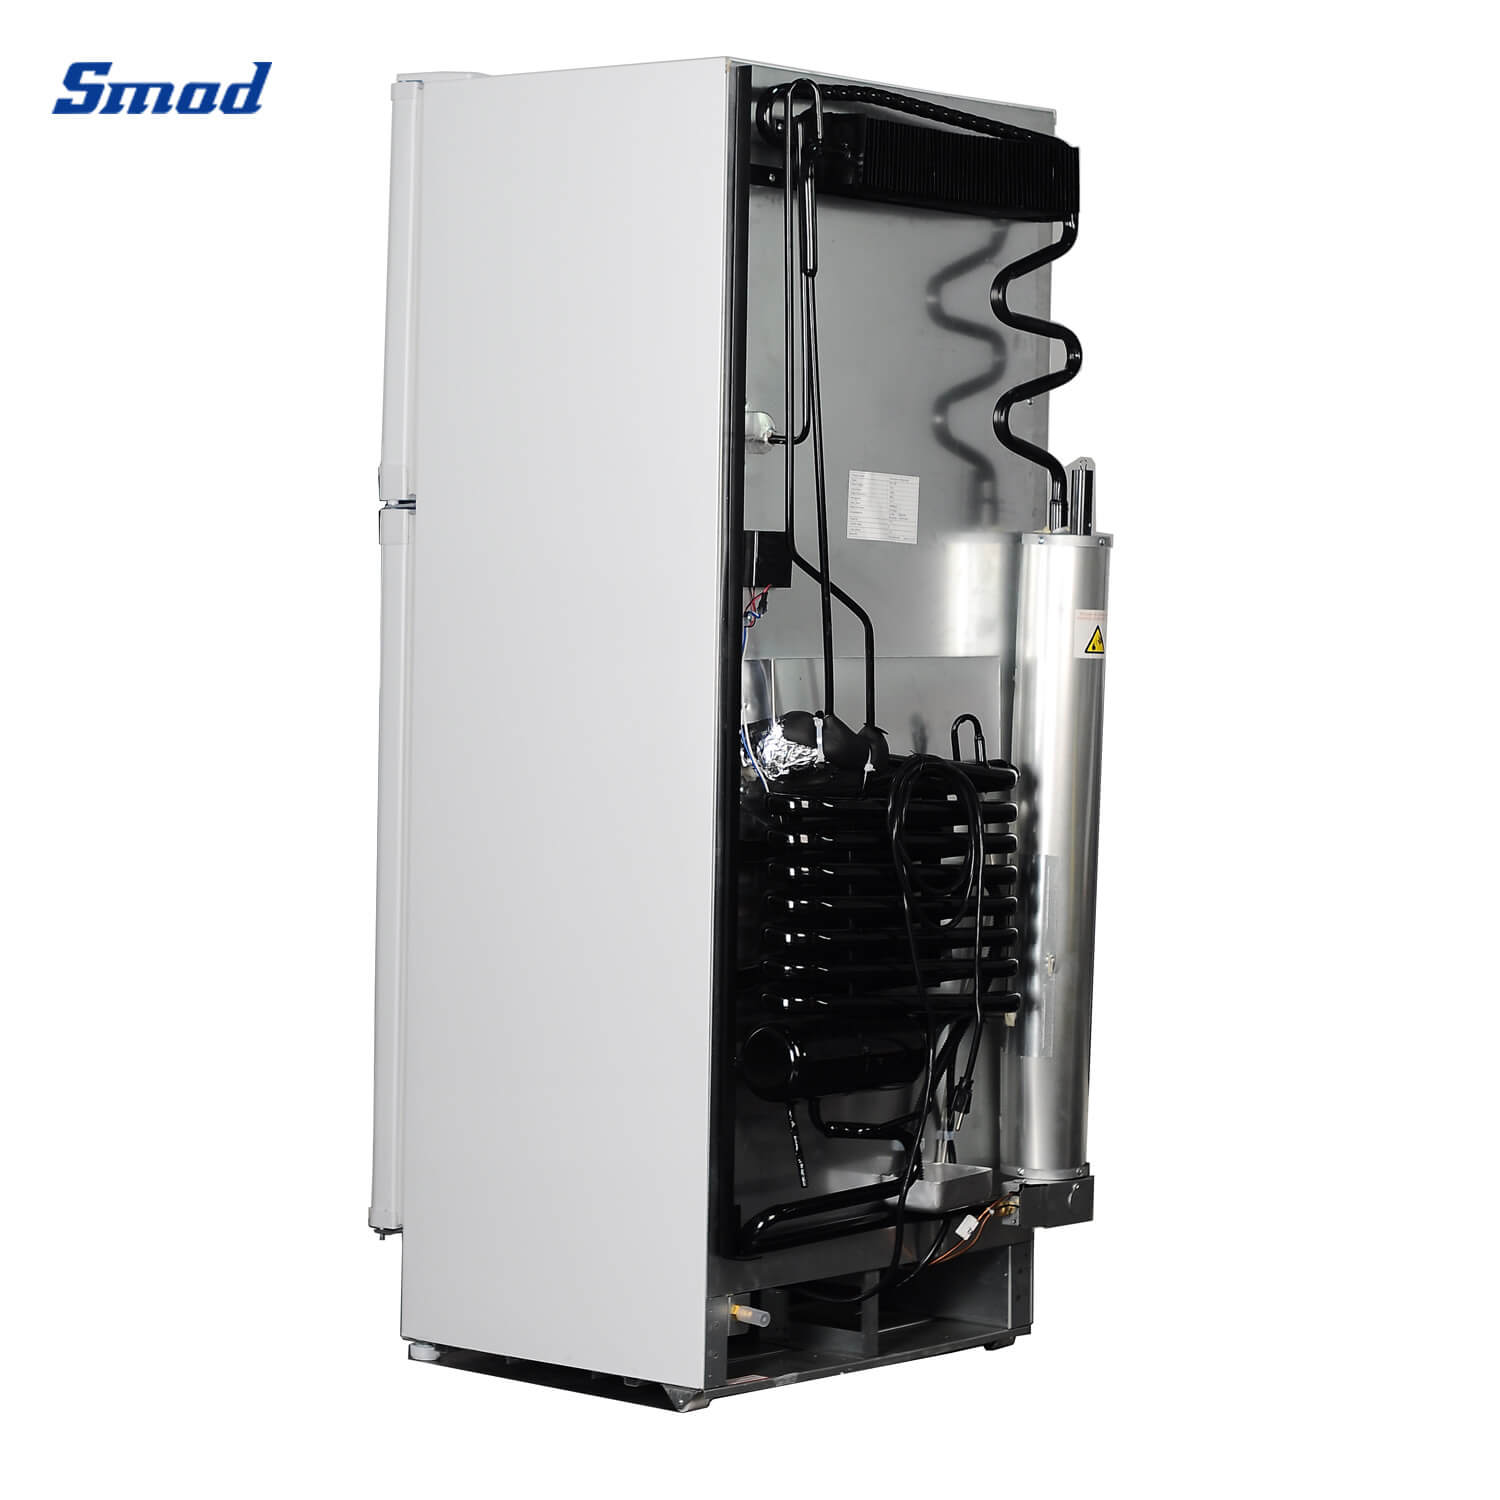 
Smad 7.9 Cu. Ft. Double Door Natural Gas Refrigerator with Low Working Noise